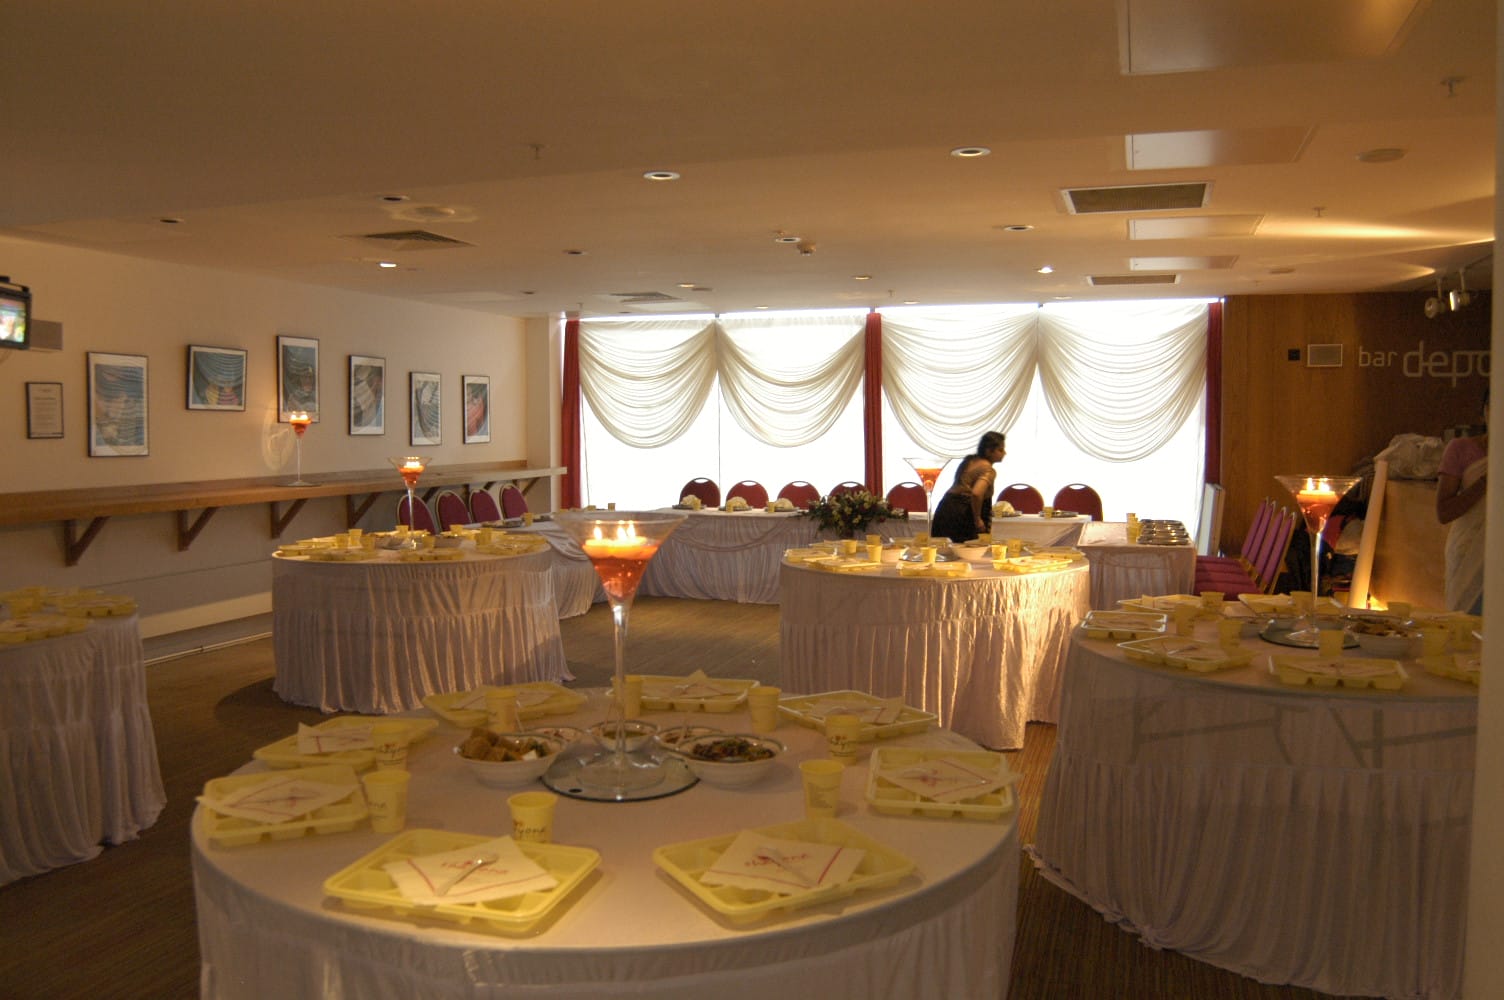 Bardepot's seating area with tables decorated with white table clothes and large candle display